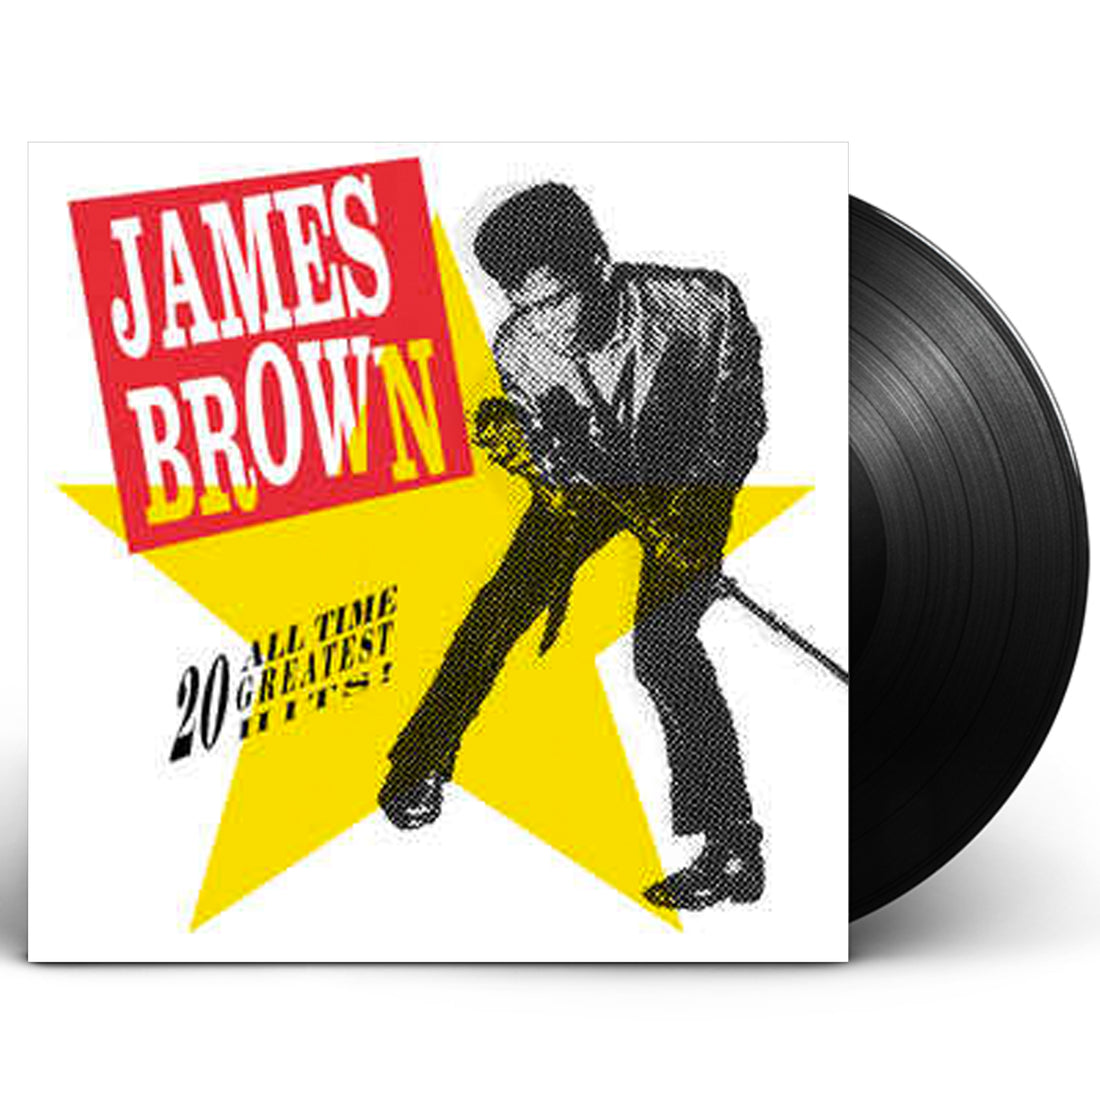 James Brown "20 All-Time Greatest Hits" 2xLP Vinyl